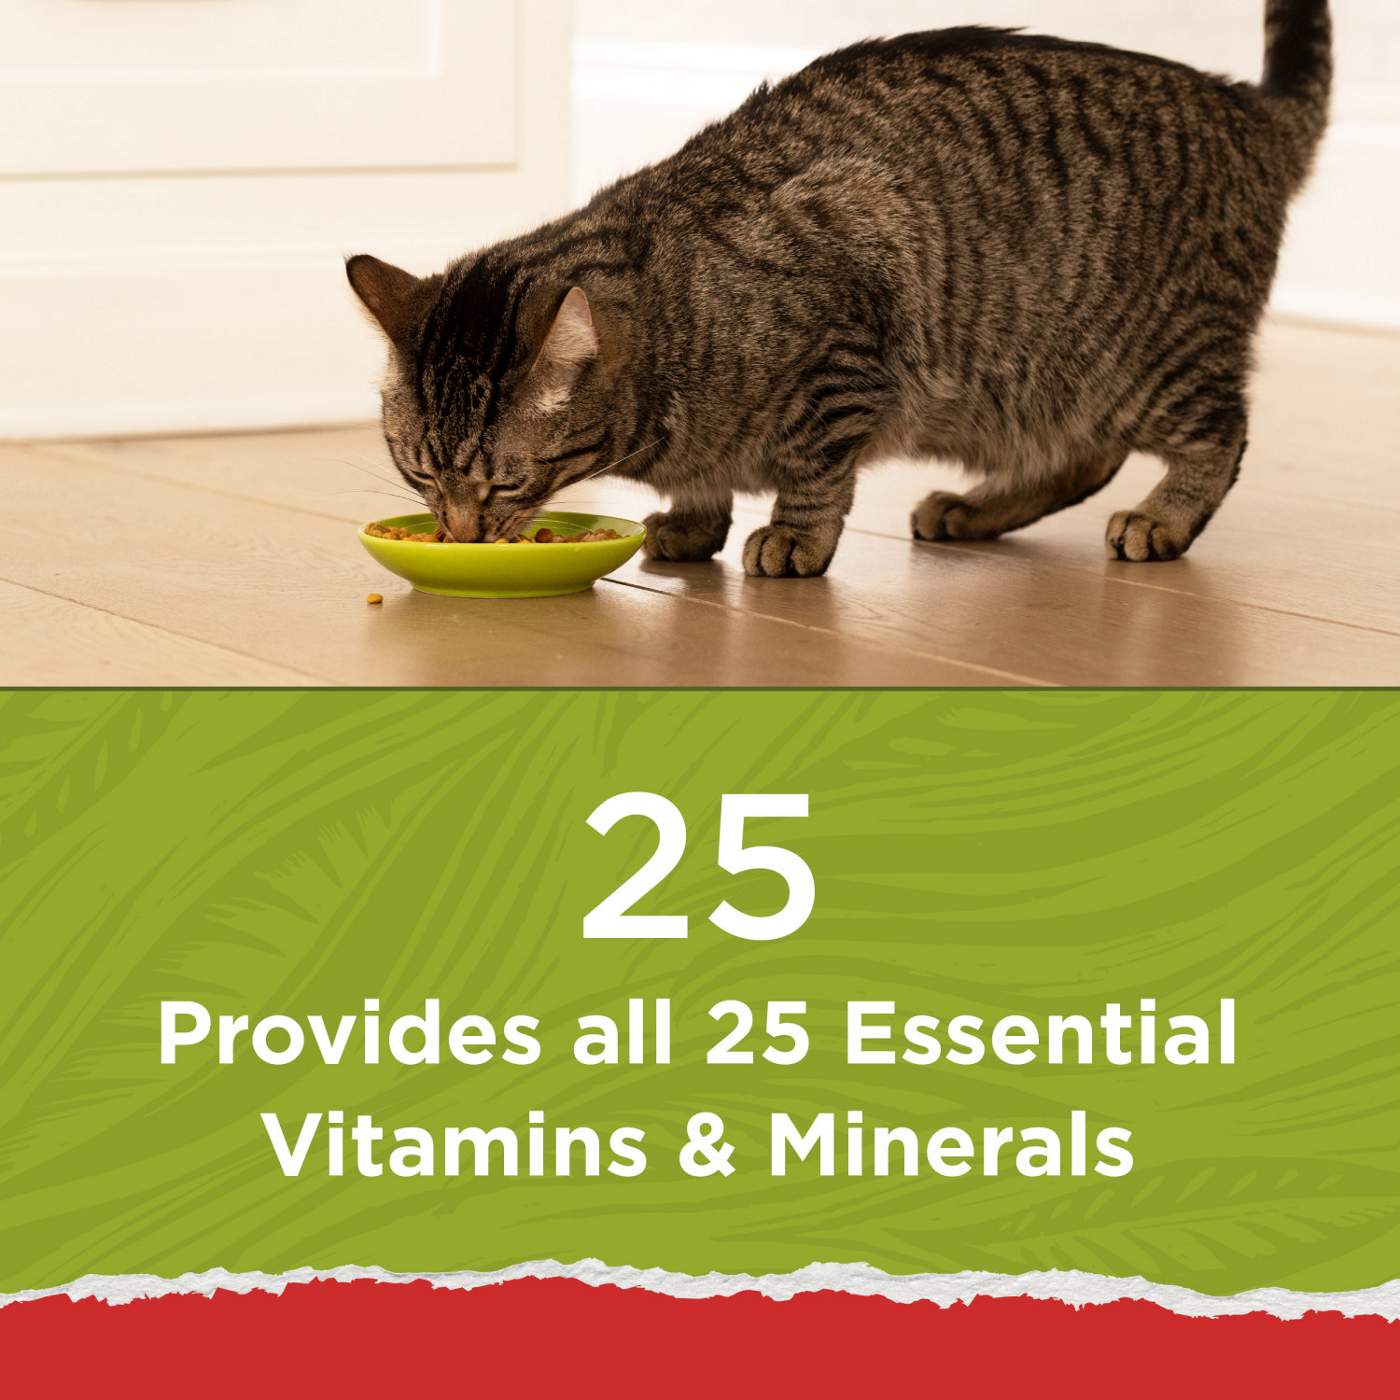 Cat Chow Purina Cat Chow Naturals With Added Vitamins, Minerals and Nutrients Dry Cat Food, Naturals Original; image 3 of 6